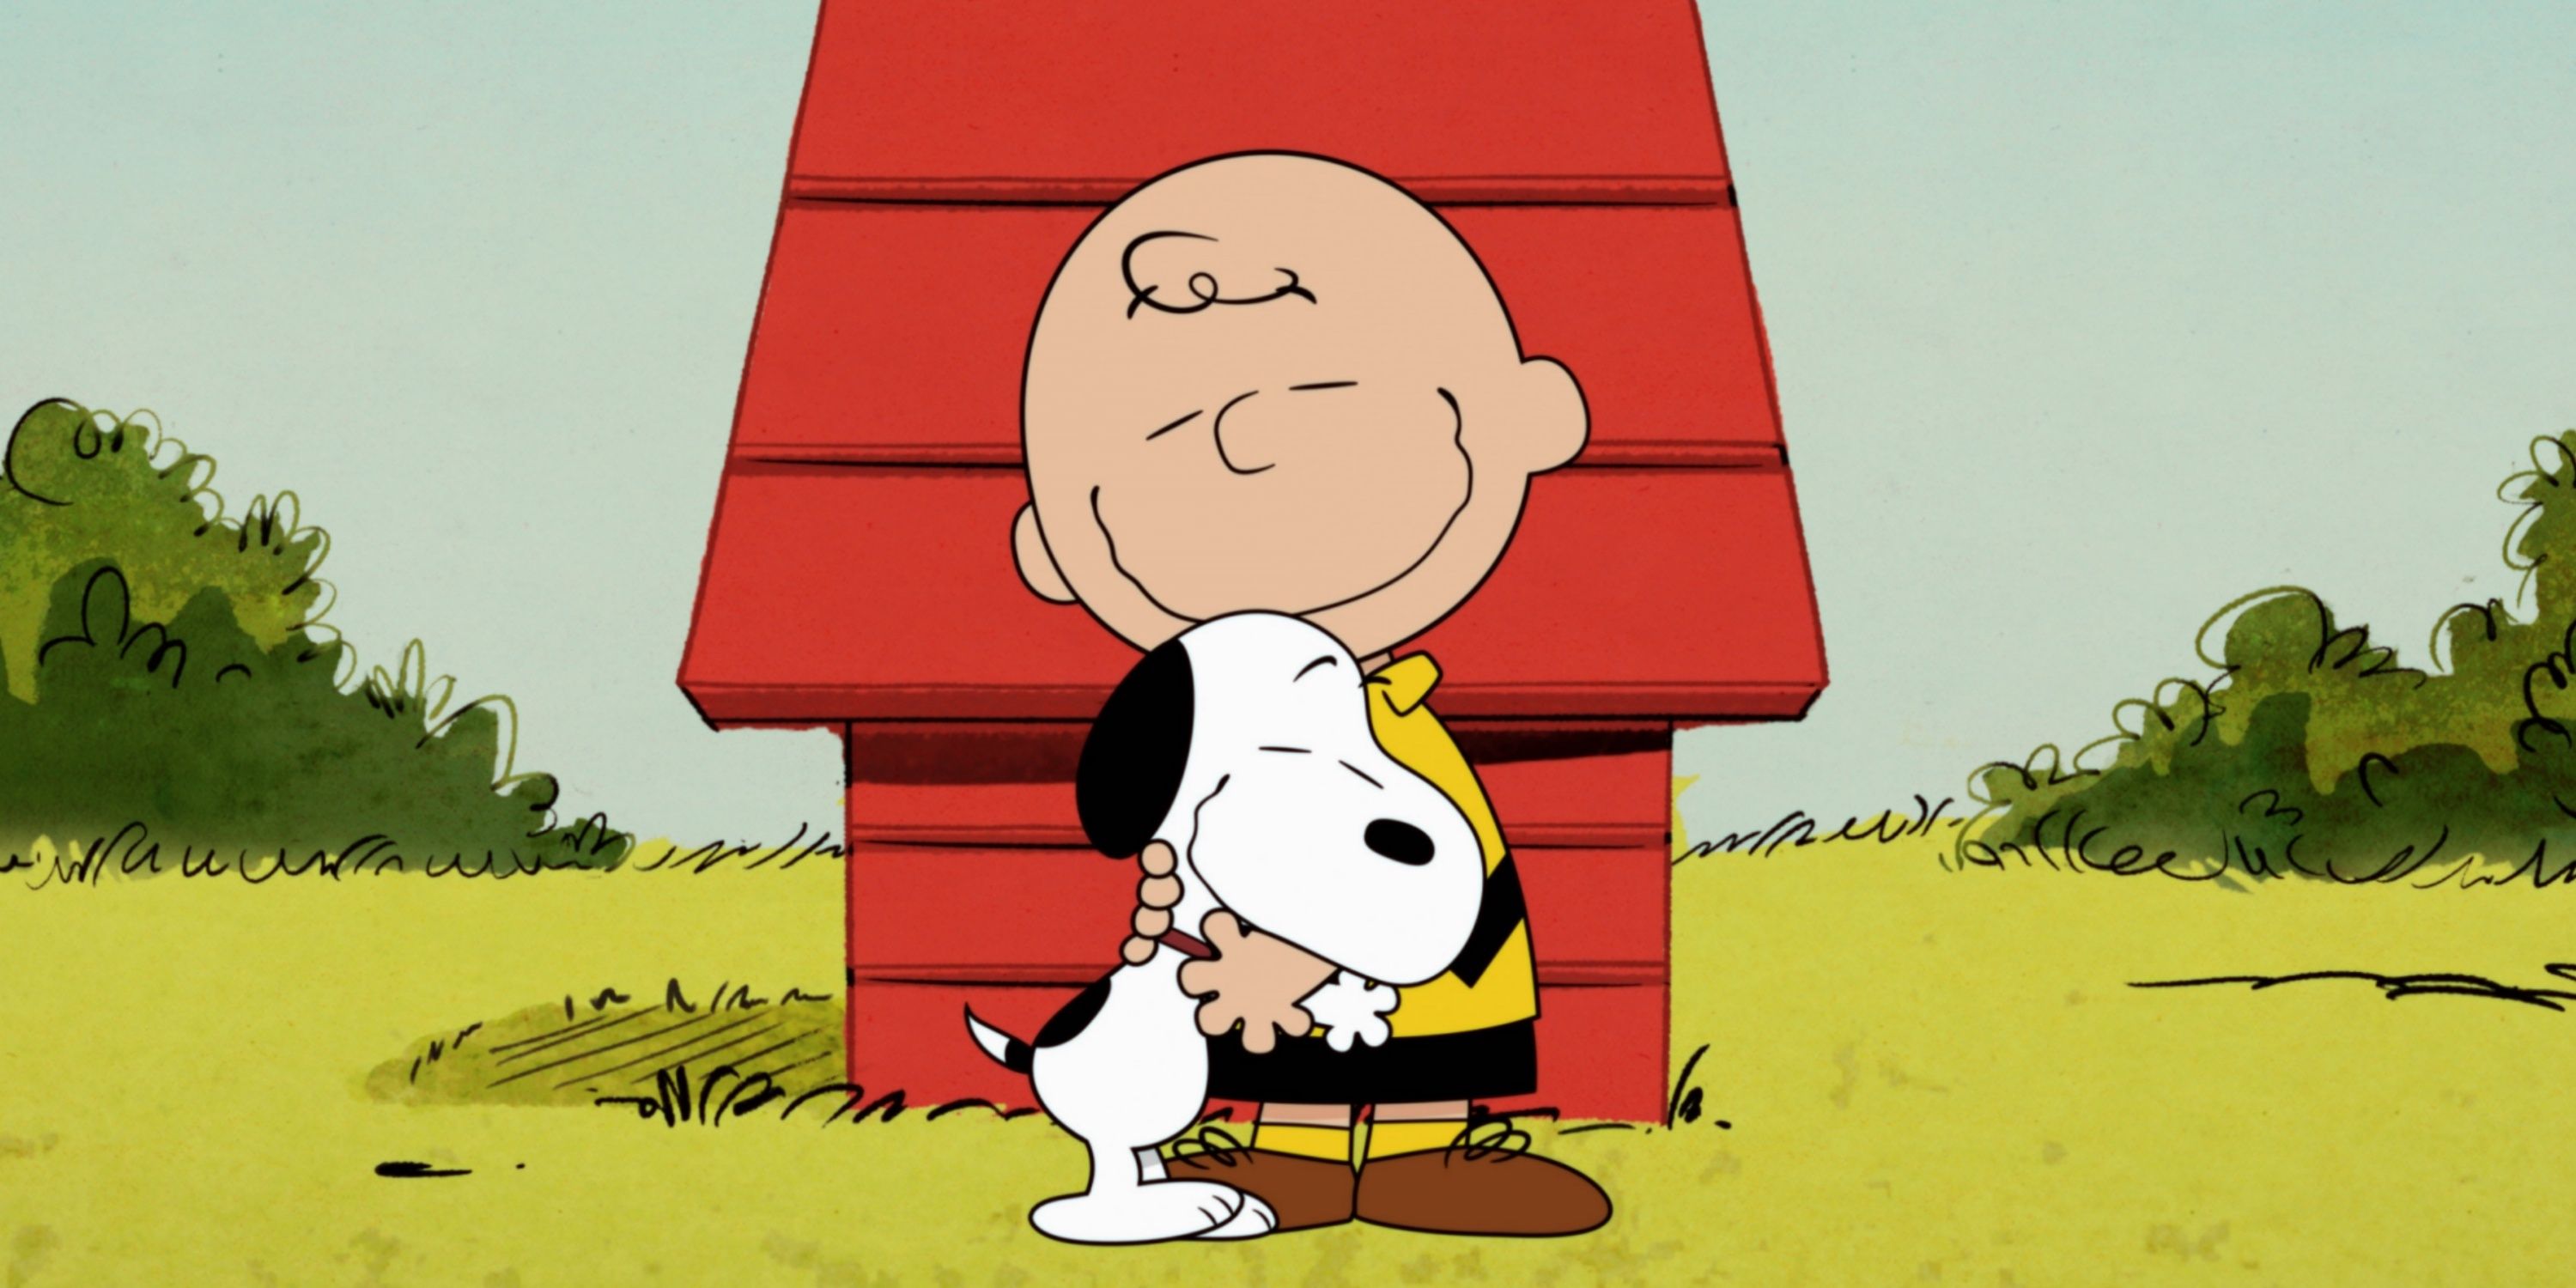 An image from The Snoopy Show